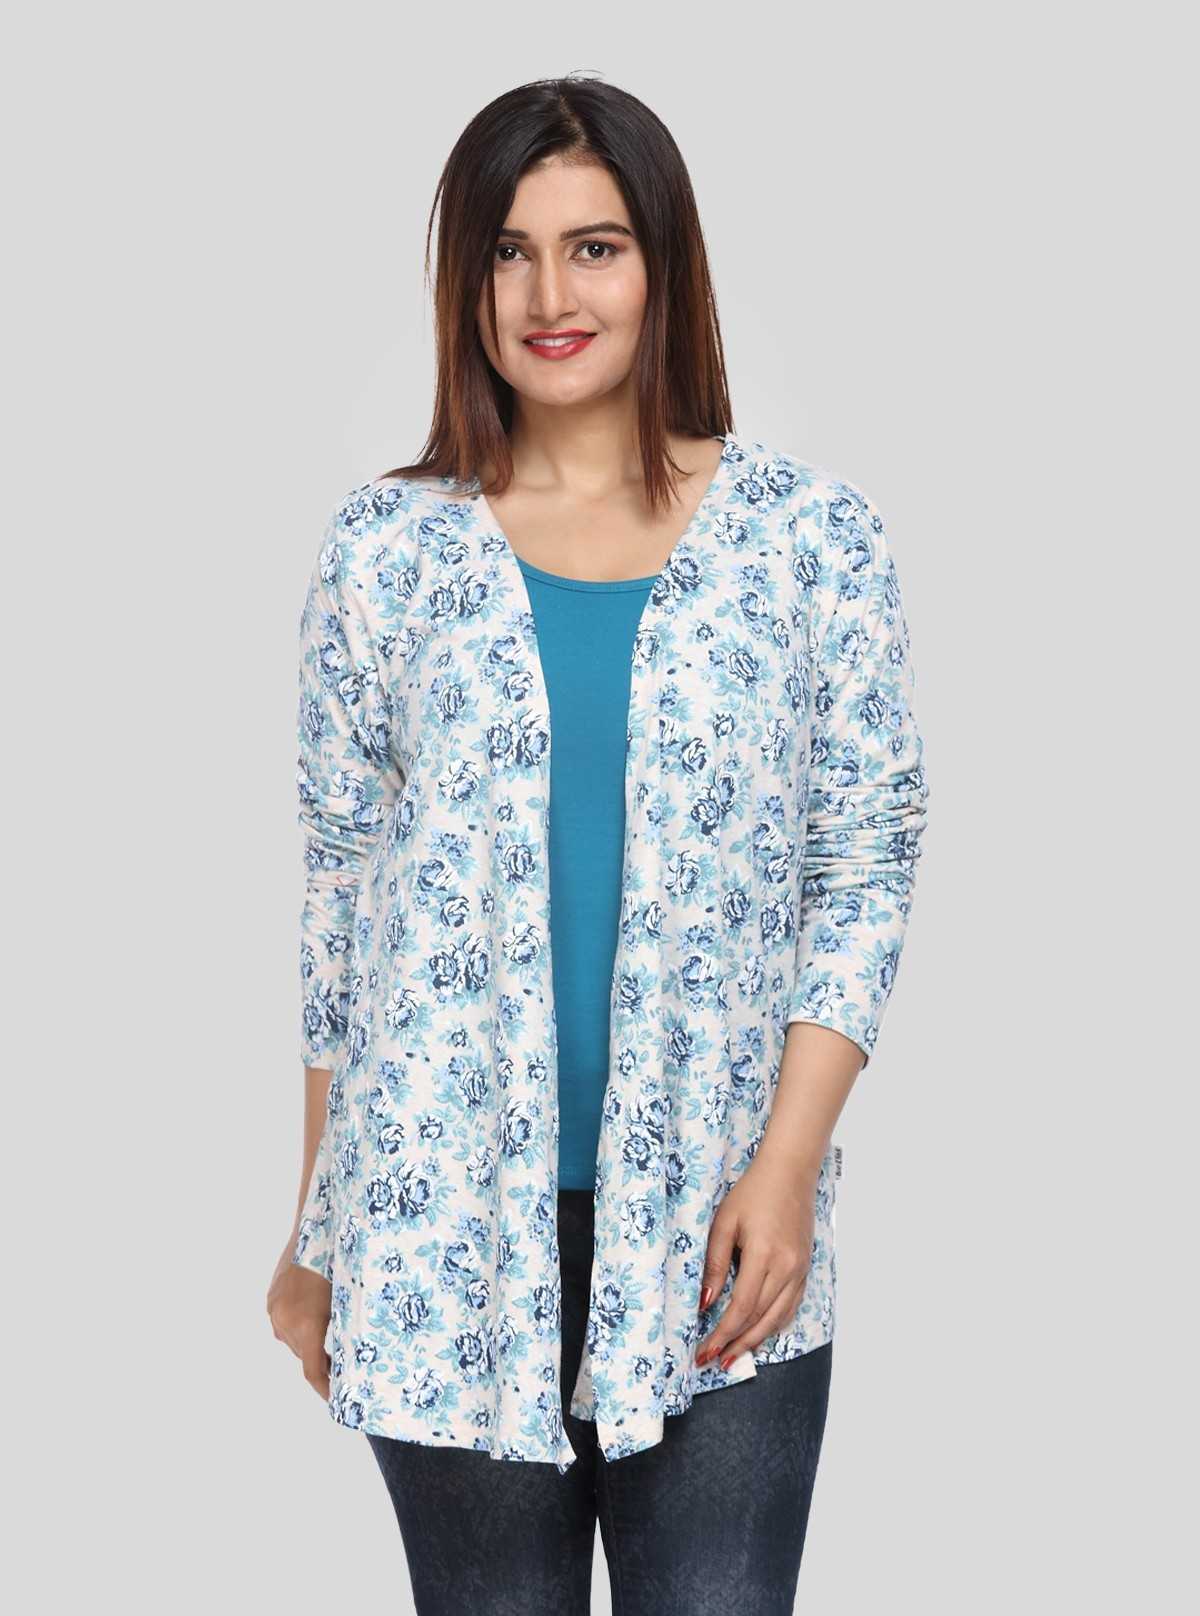 Blue Floral Print Shrug Boer and Fitch - 1